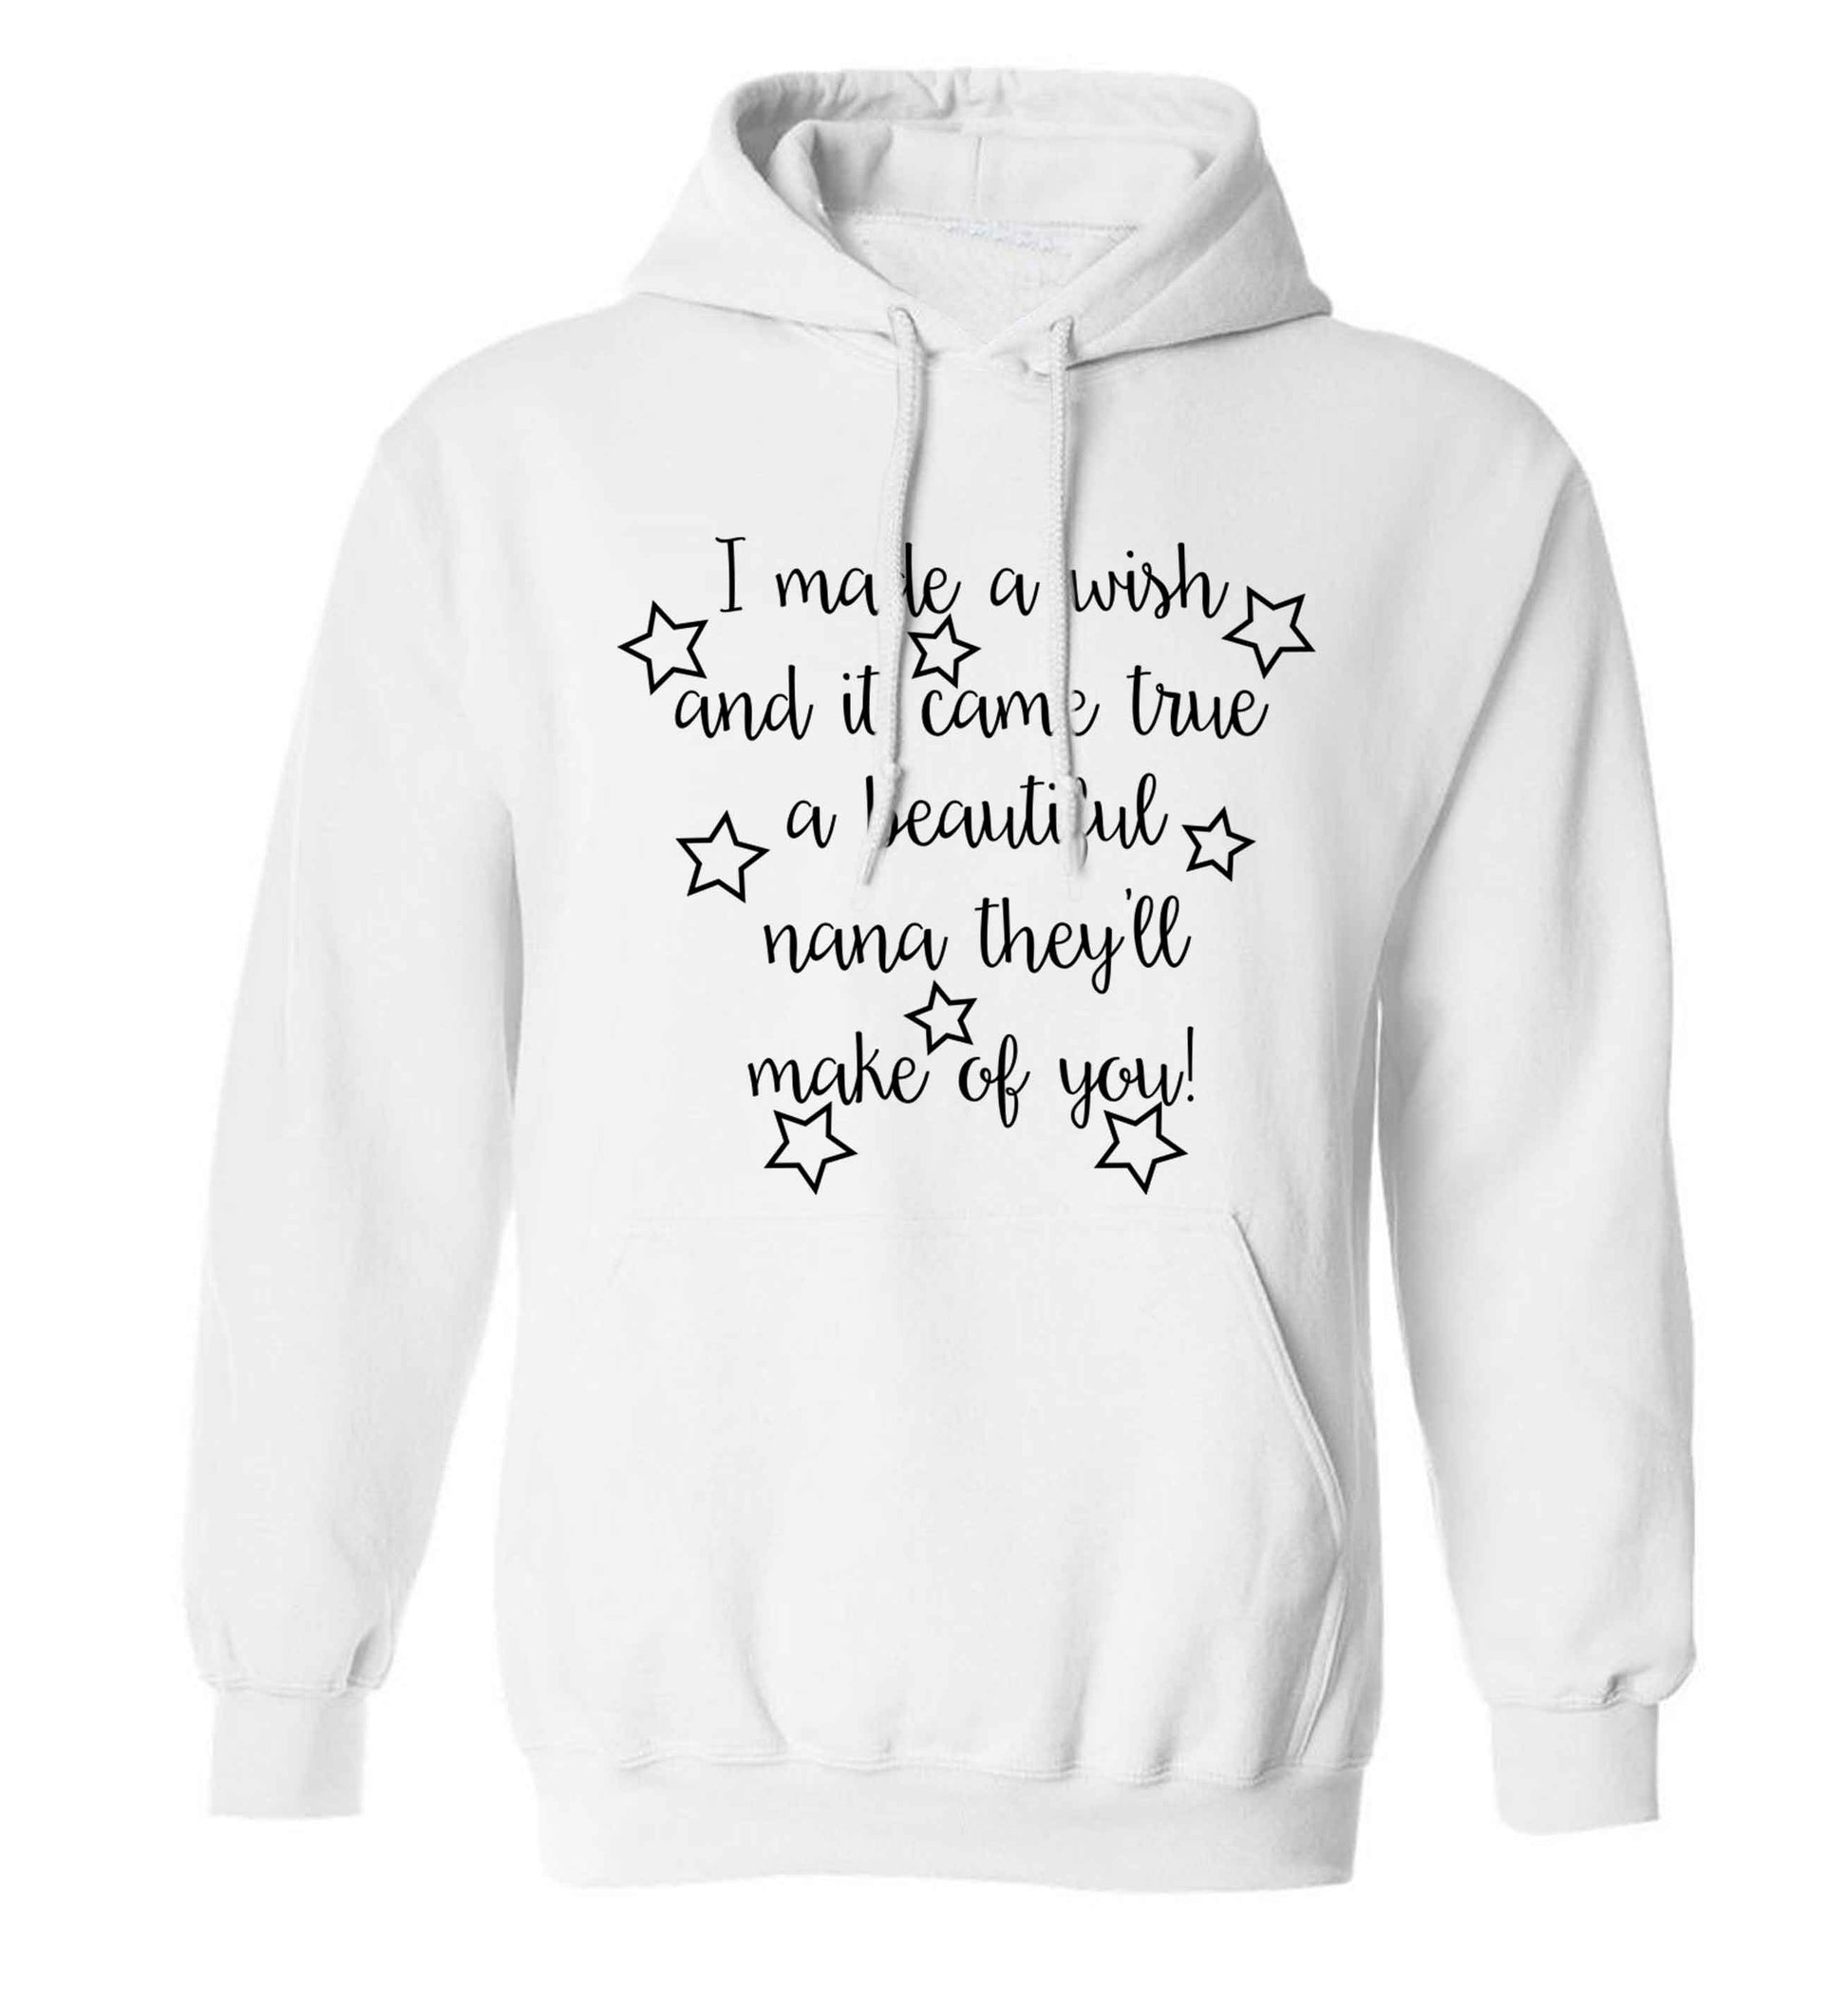 I made a wish and it came true a beautiful nana they'll make of you! adults unisex white hoodie 2XL